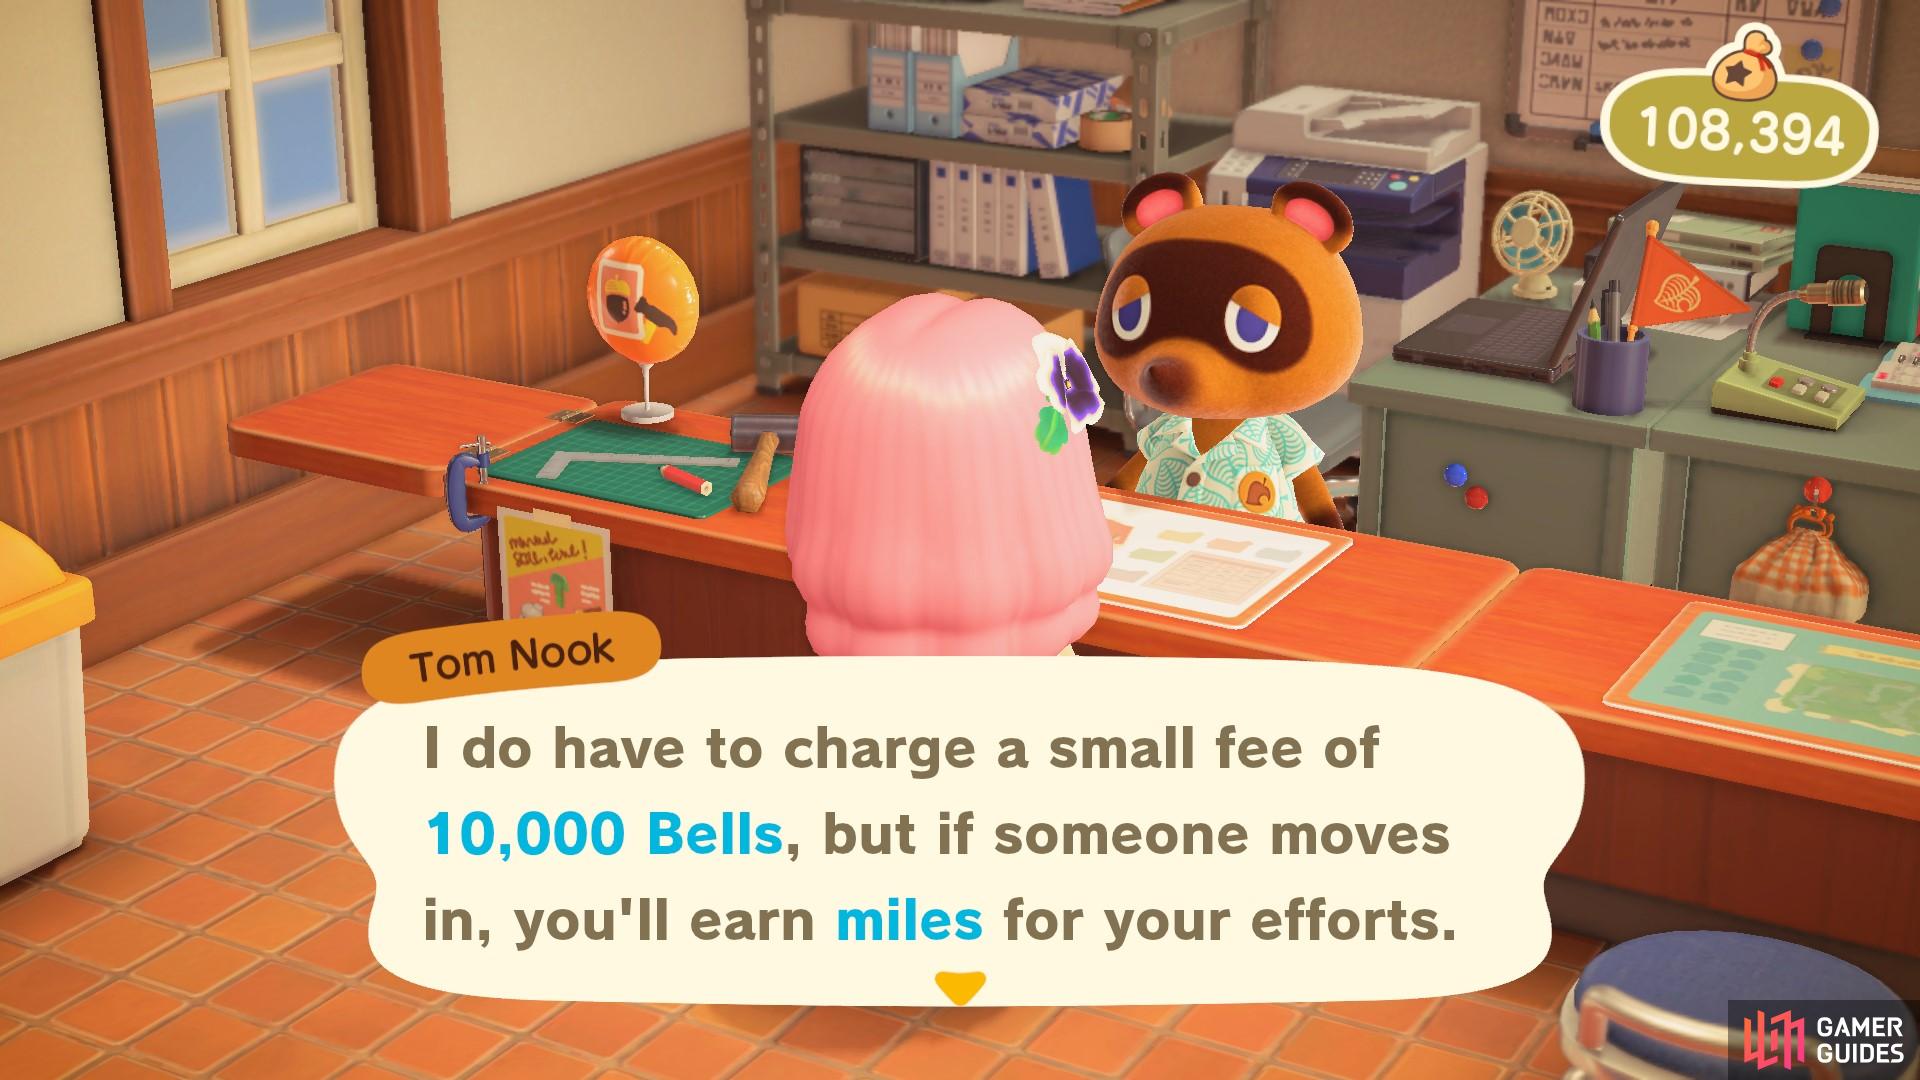 Nook is always looking to charge you for something, huh?